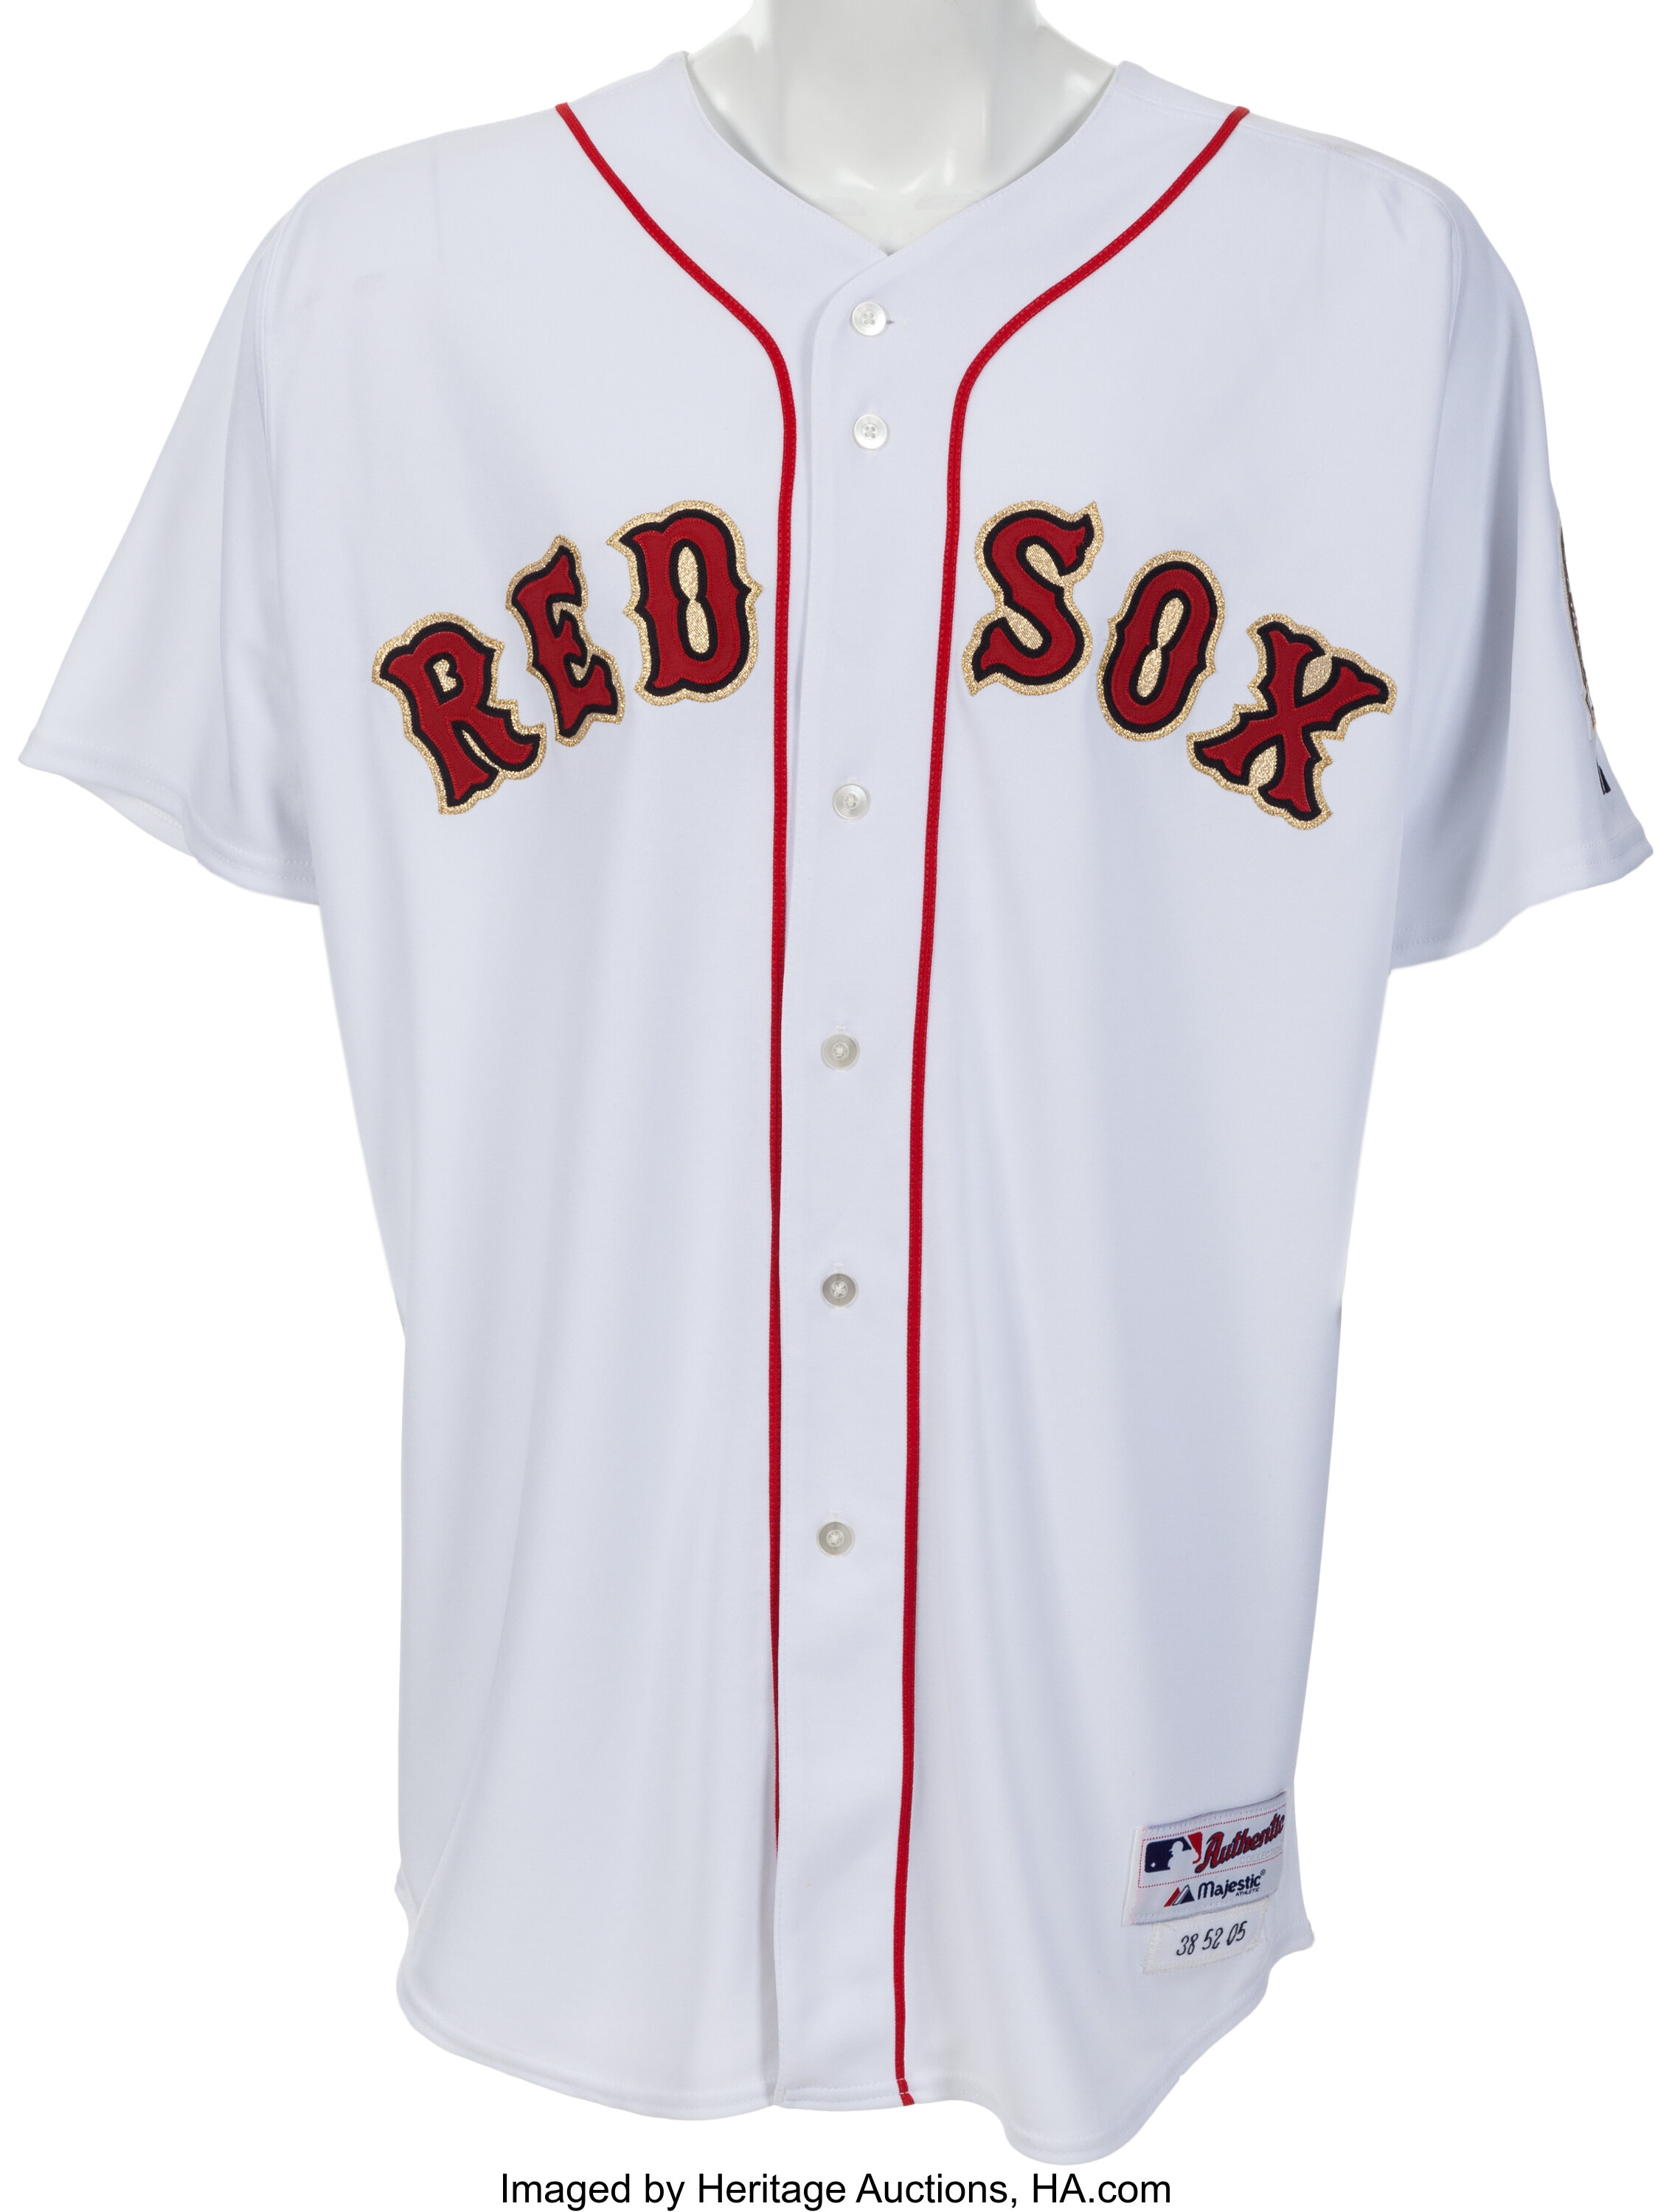 red sox gold jersey